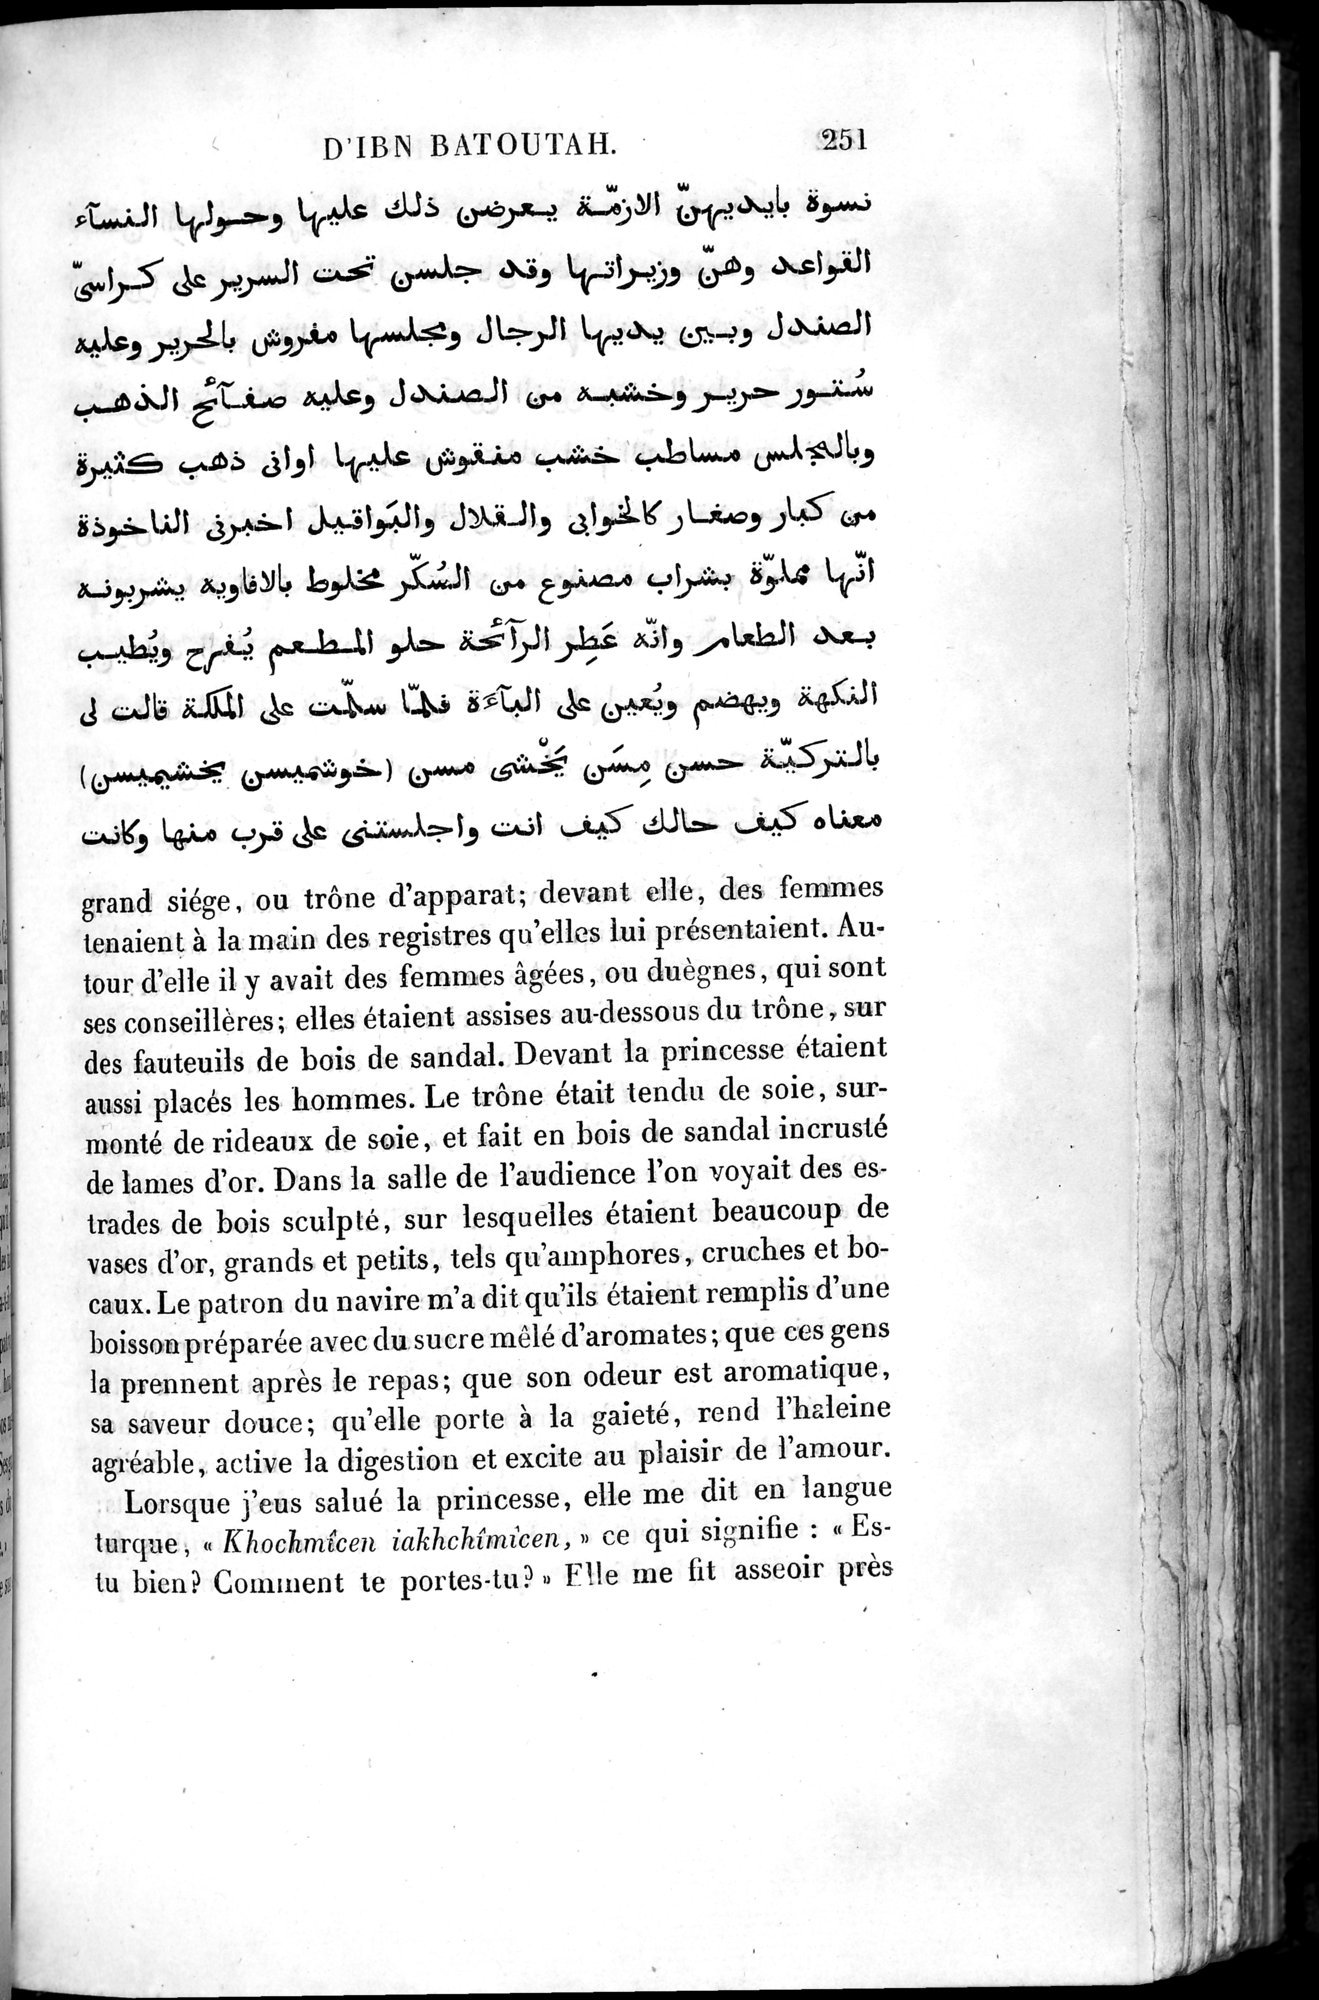 Voyages d'Ibn Batoutah : vol.4 / Page 263 (Grayscale High Resolution Image)